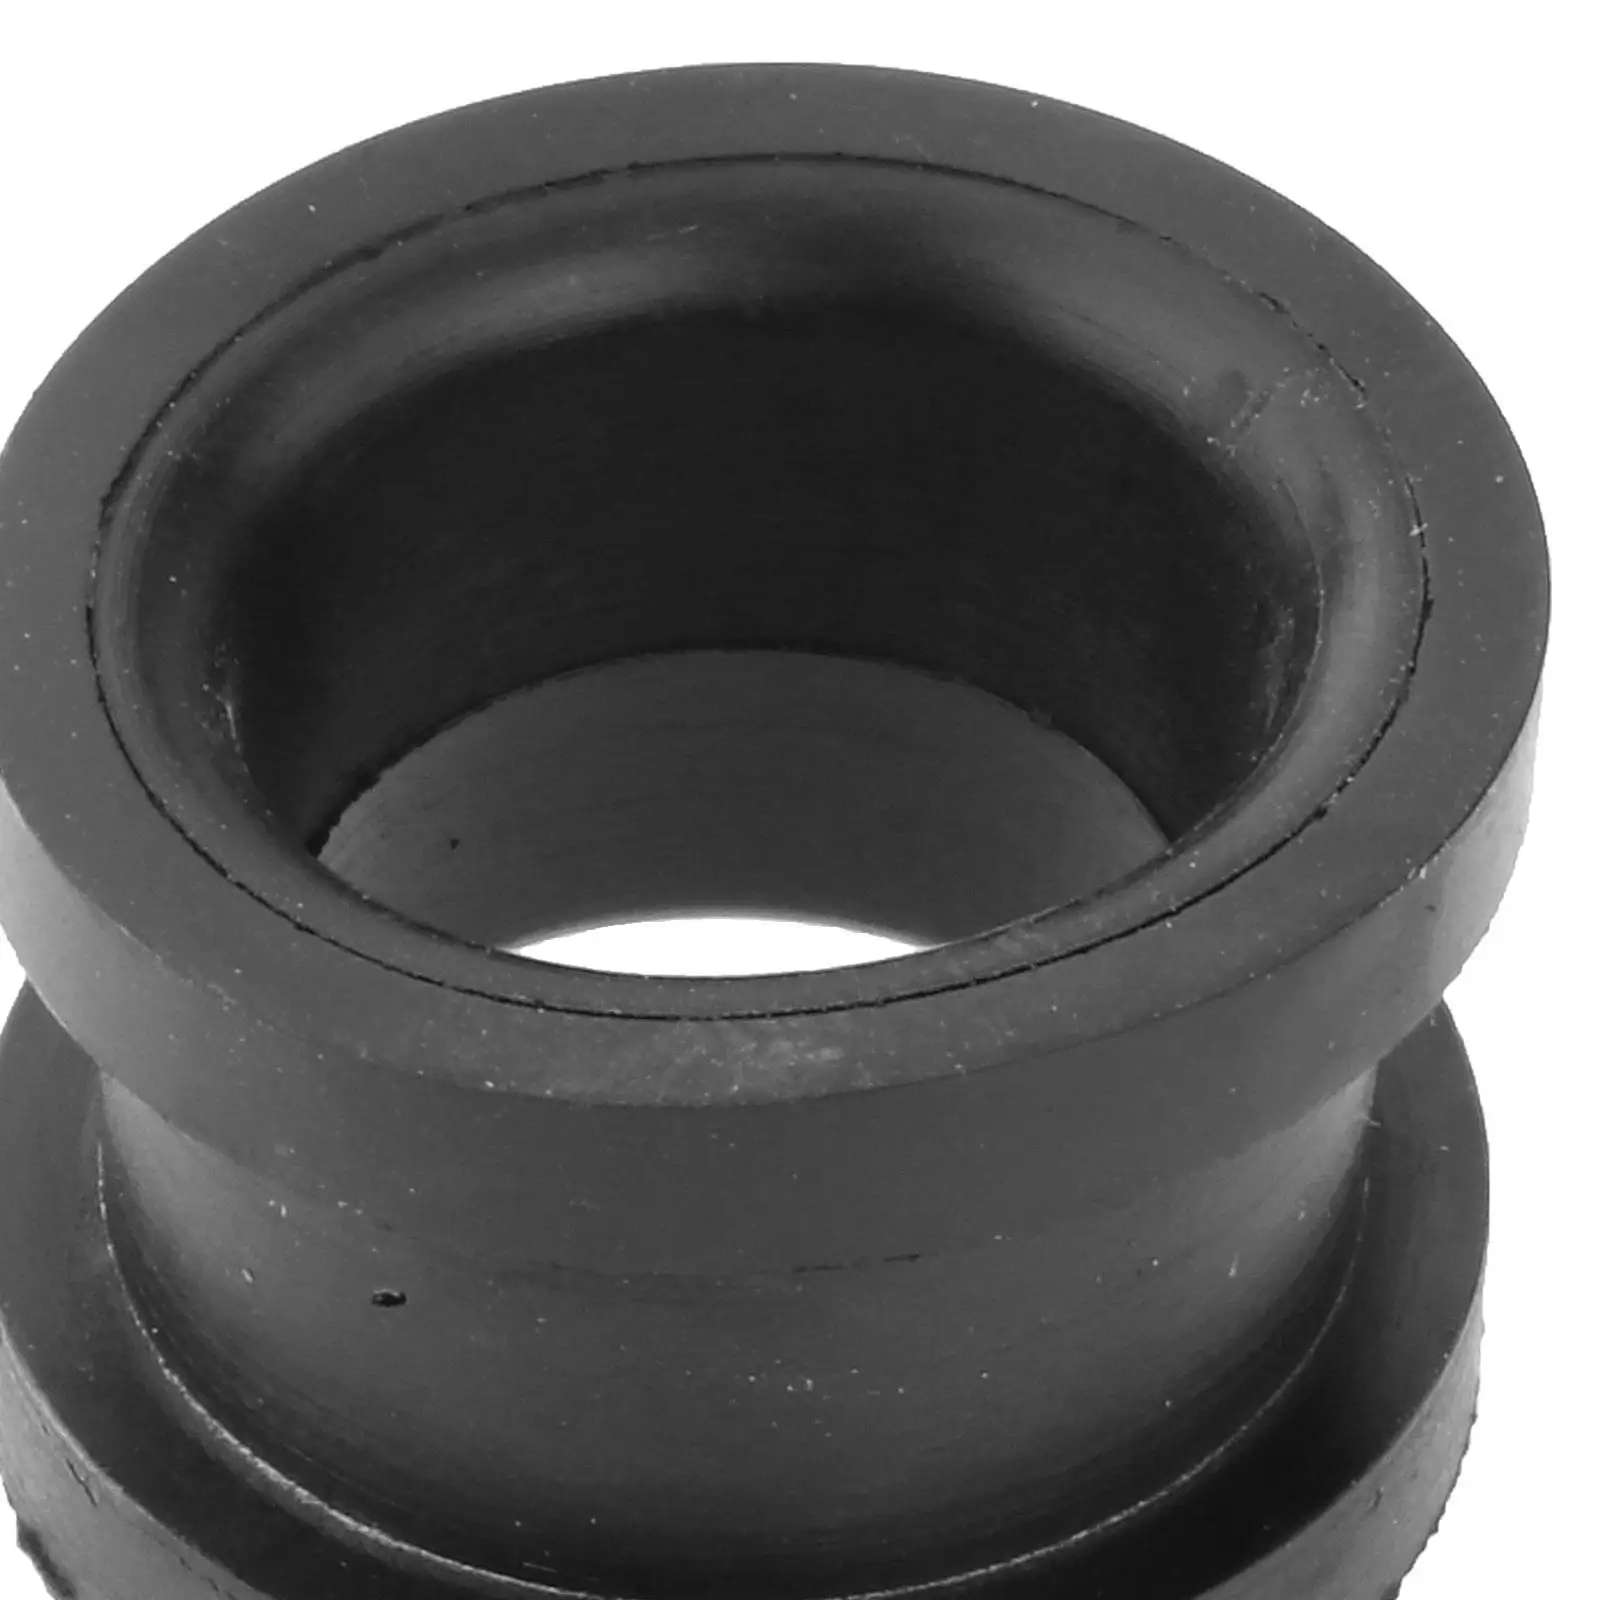  663-44367-00 Rubber Damper 26-81427M Replace for Spare Parts 40HP Outboard Motorcycles Motorbikes